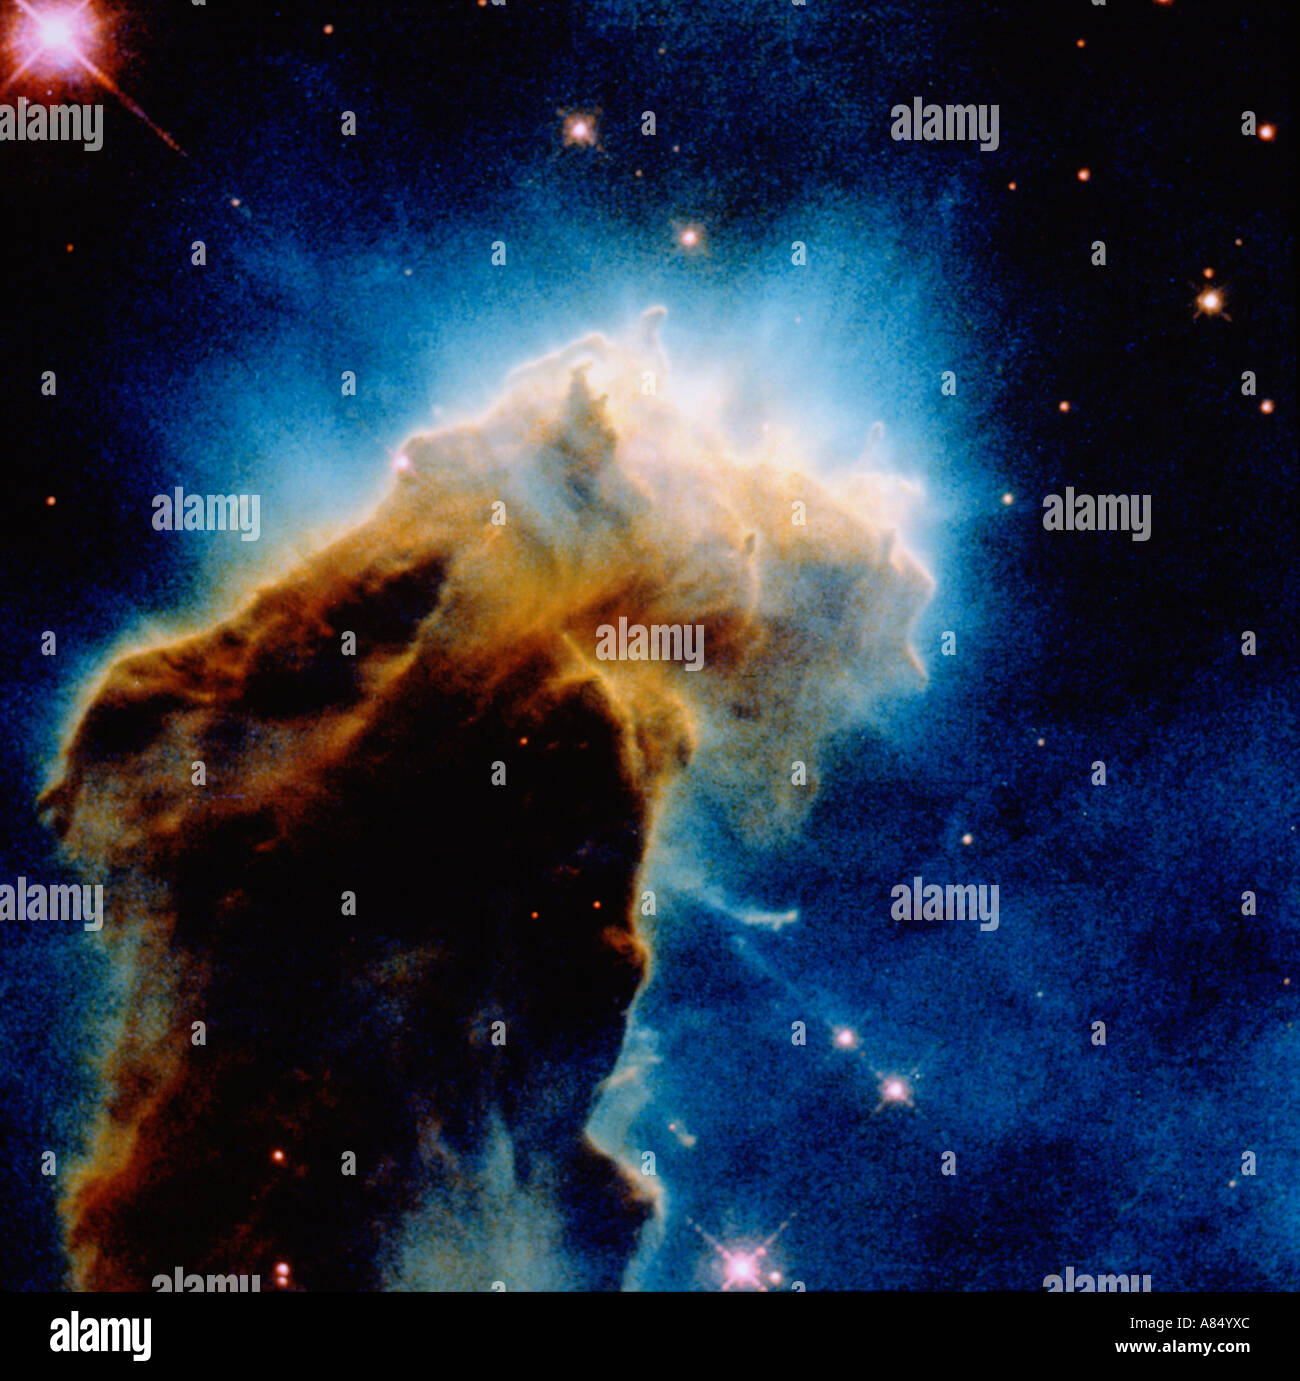 Astronomy. Star birth clouds in deep space. Eagle nebula. Hubble telescope image. Stock Photo